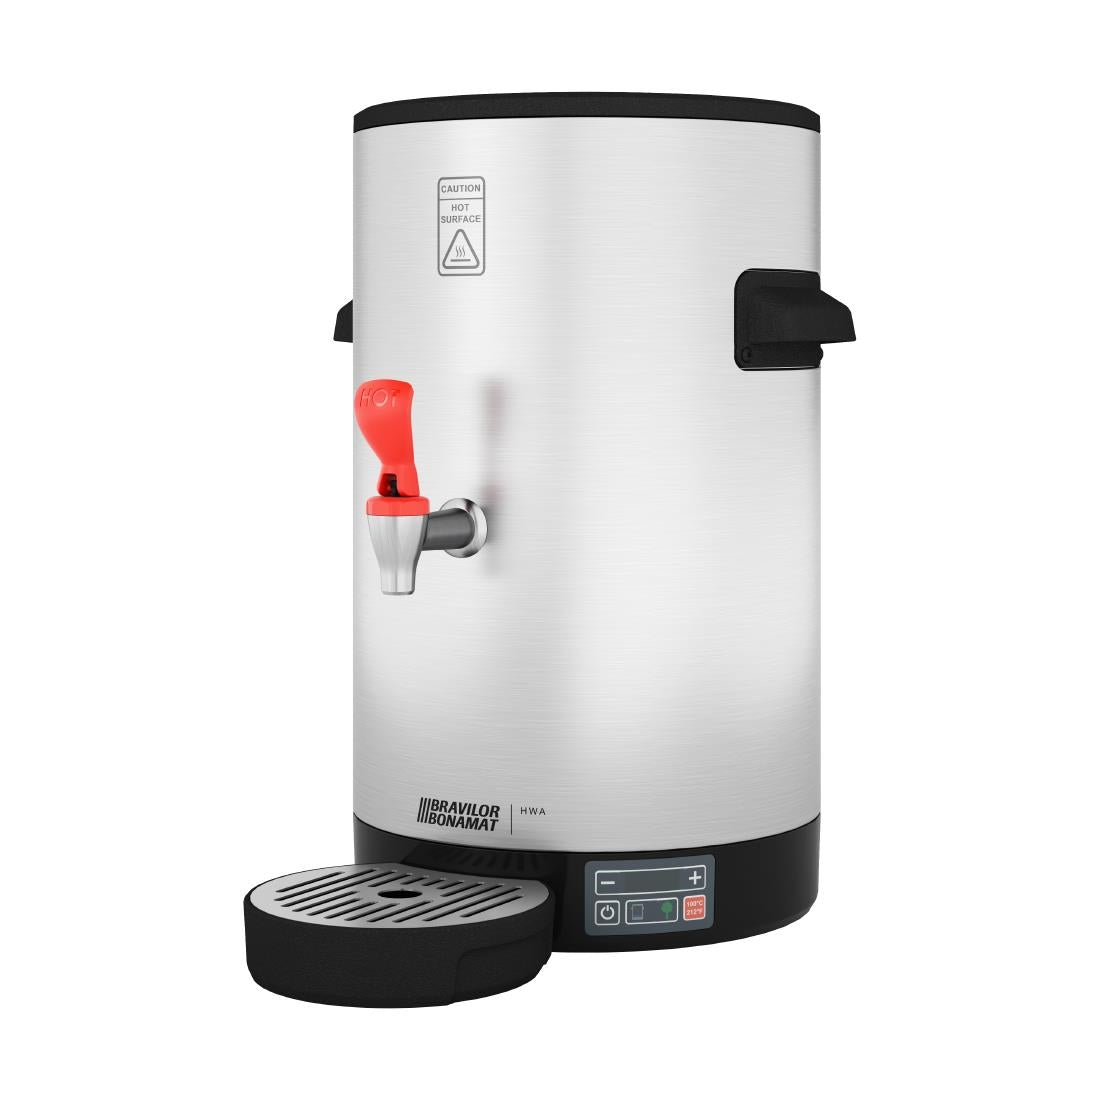 CH311 Bravilor Eco Hot Water Boiler HWA 8 JD Catering Equipment Solutions Ltd